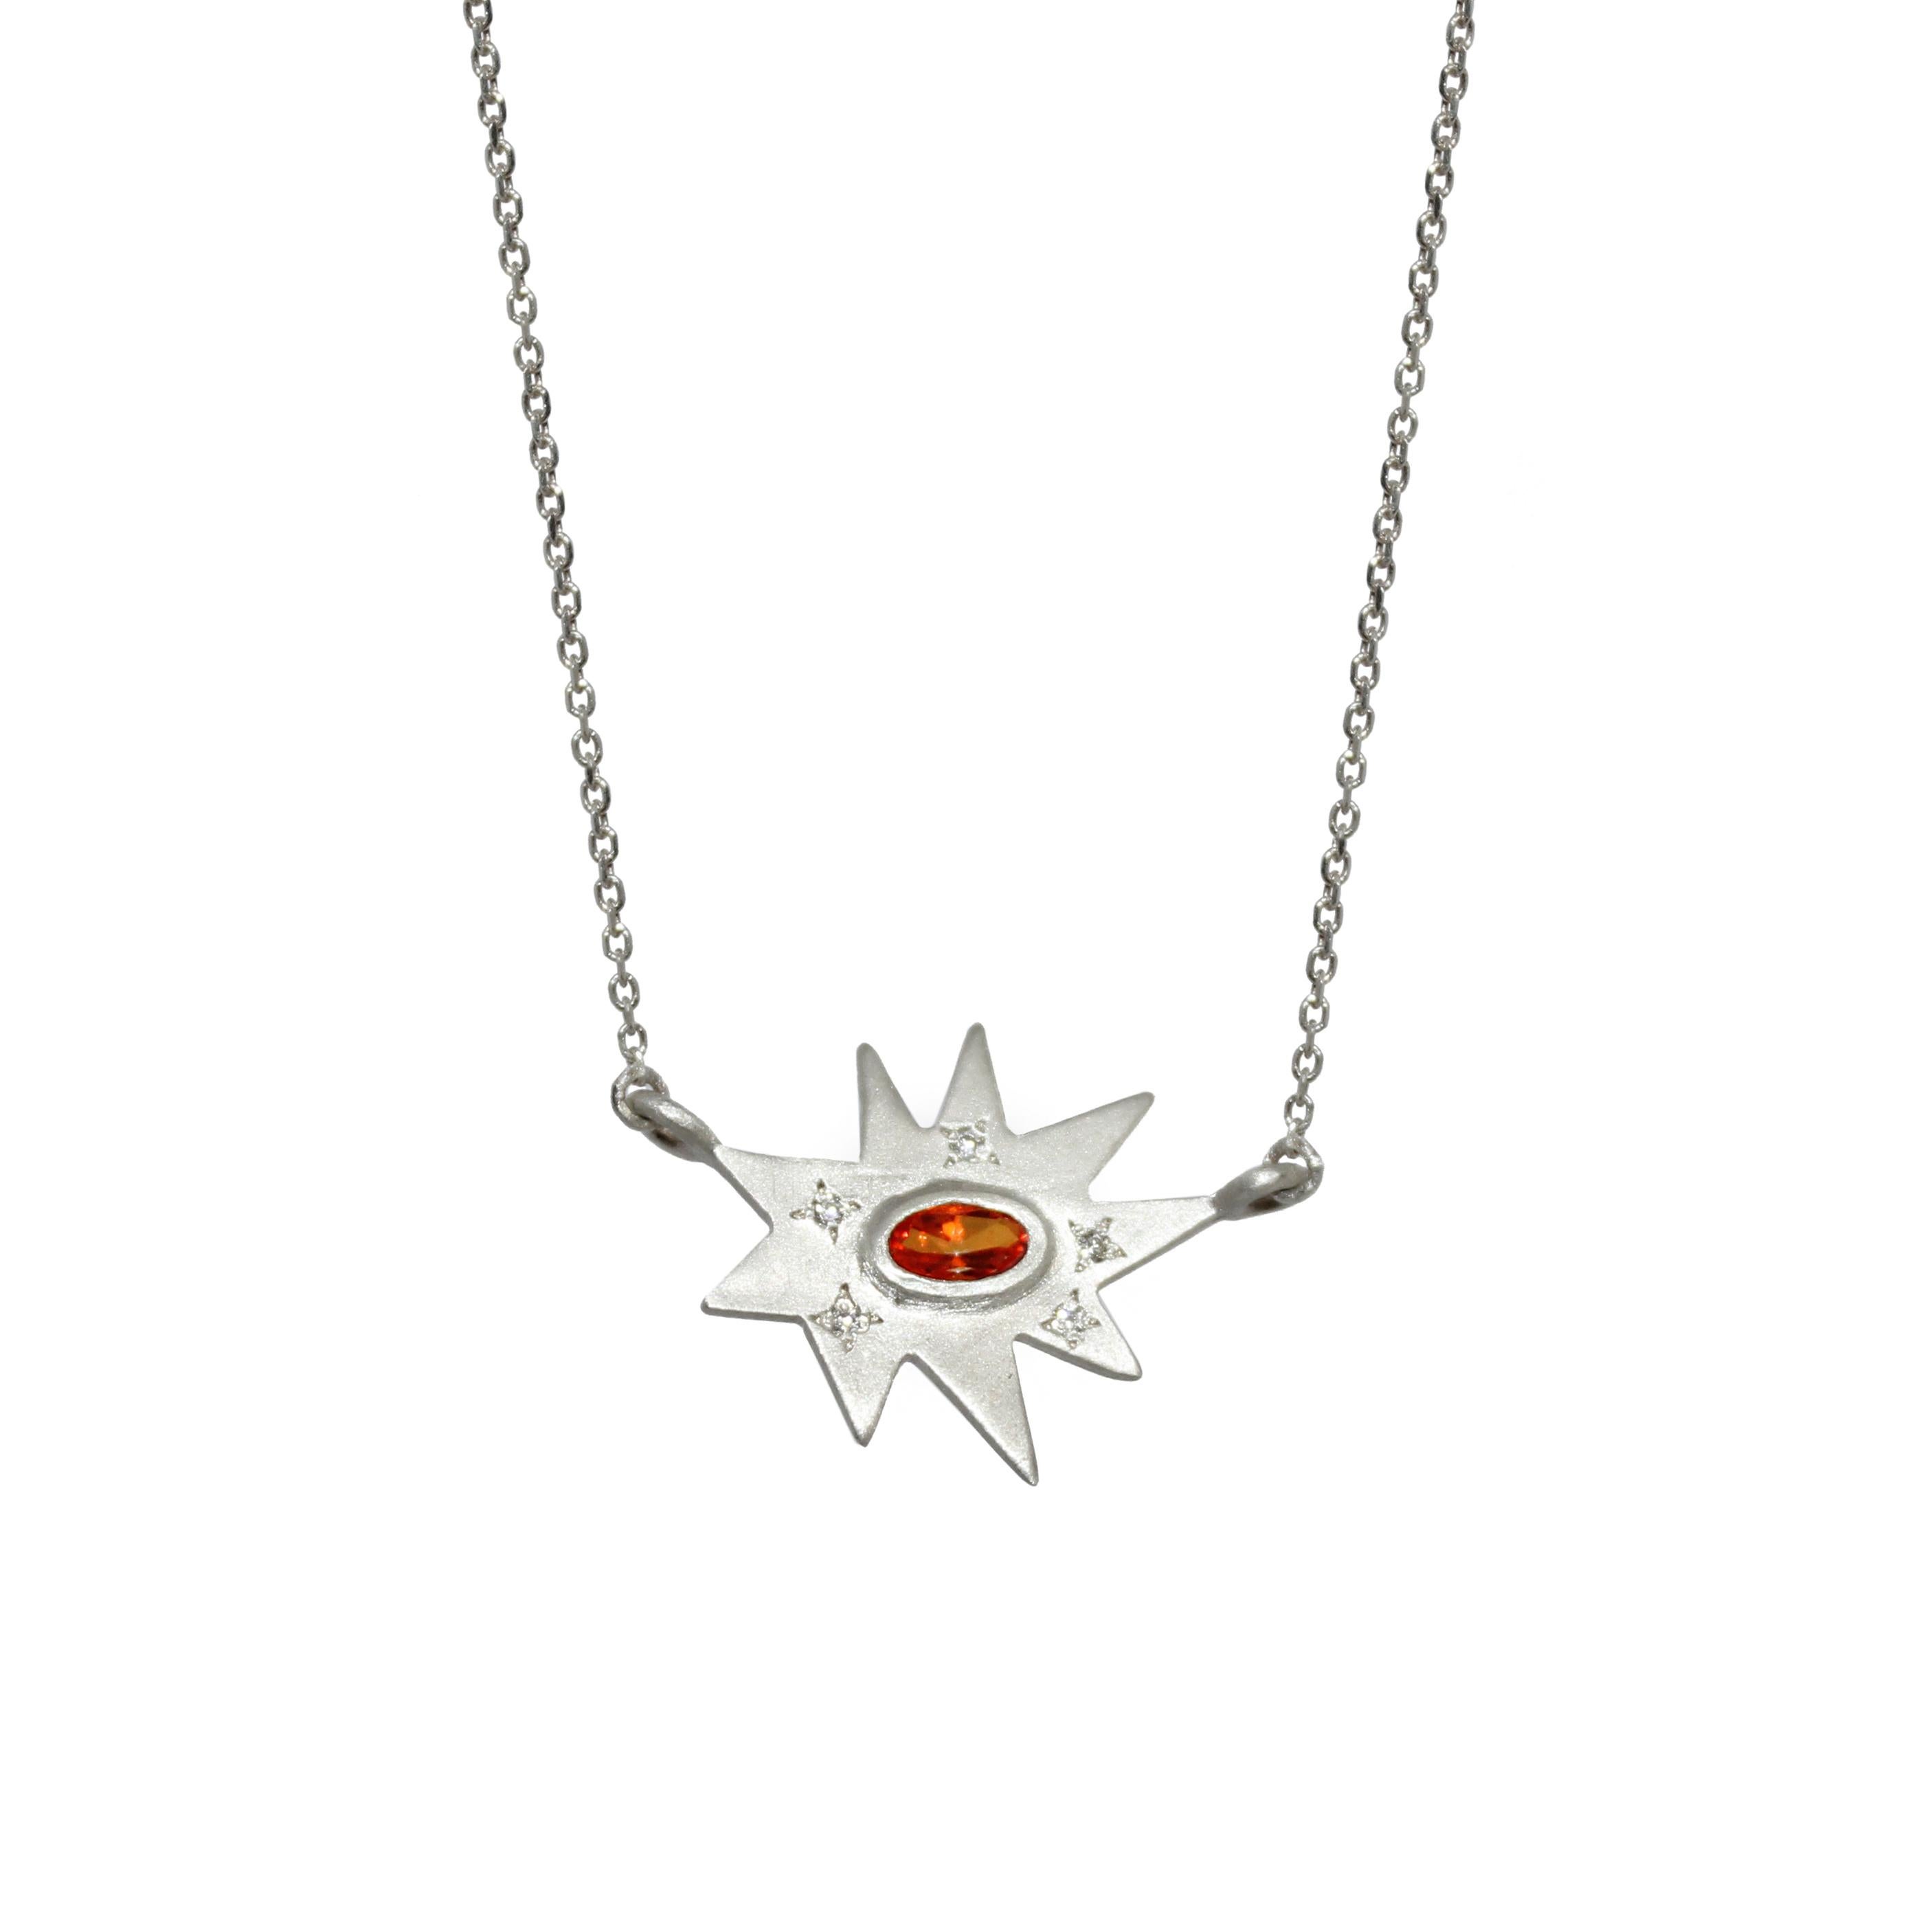 Classic and stunning. Our iconic matte silver Stellina necklace features our signature diamond dusting and a vibrant poppy passion topaz center. Hanging on a delicate chain, this piece is made to accent any outfit, and layers perfectly. 

This